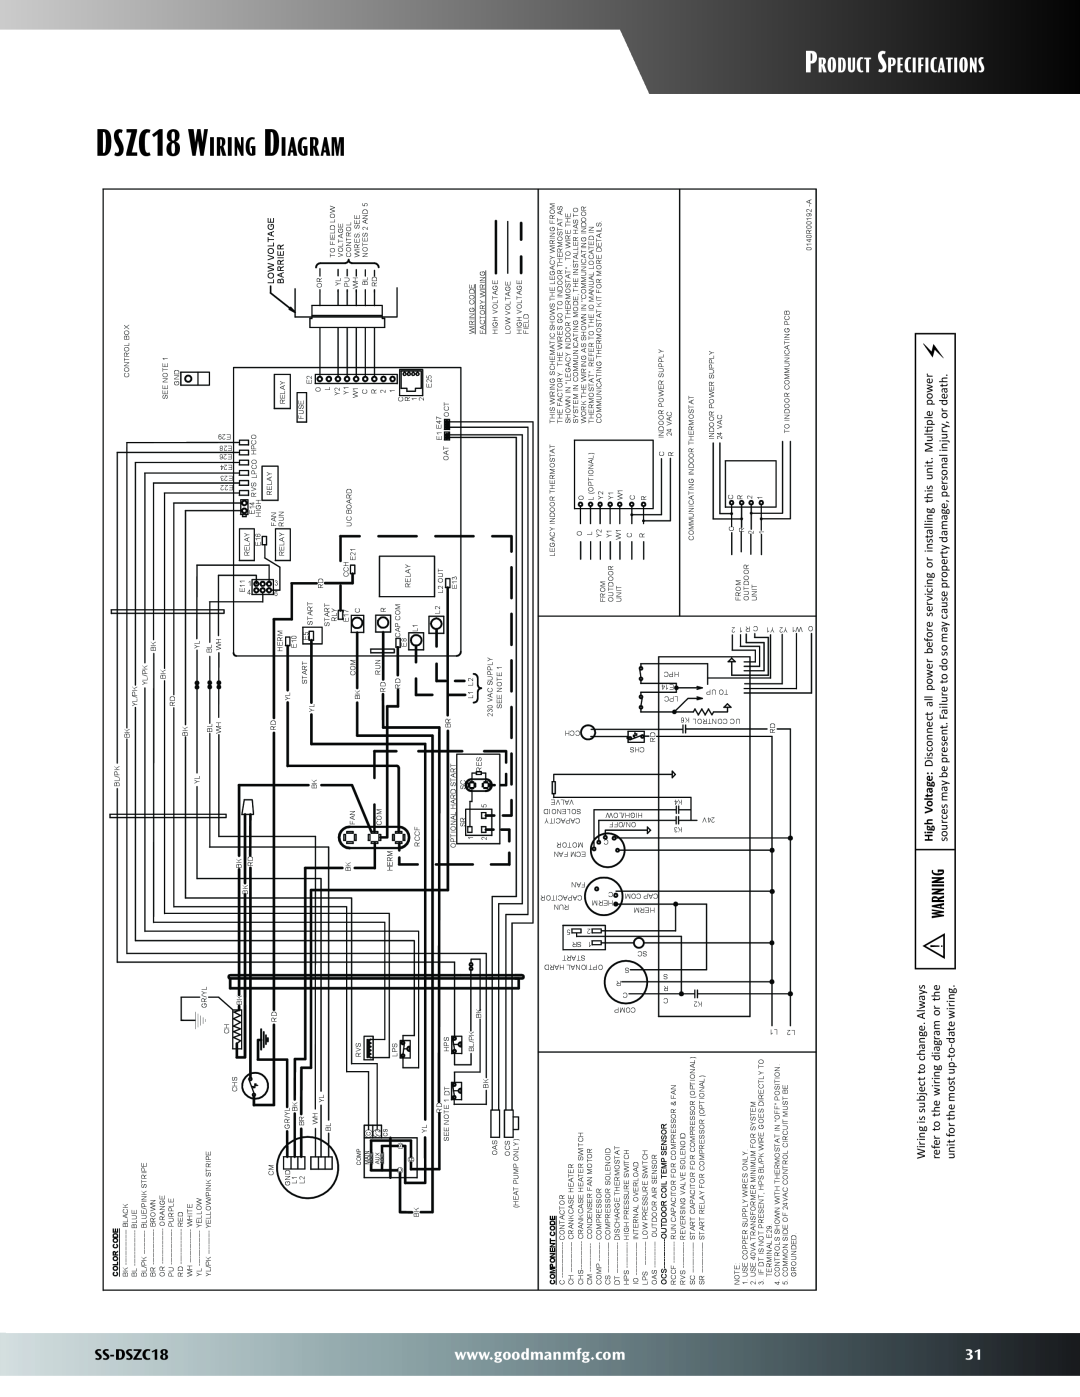 Goodman Mfg SS-DSZC18 pecifications, Product S, Wiring is subject to change. Always, refer to the wiring diagram or the 